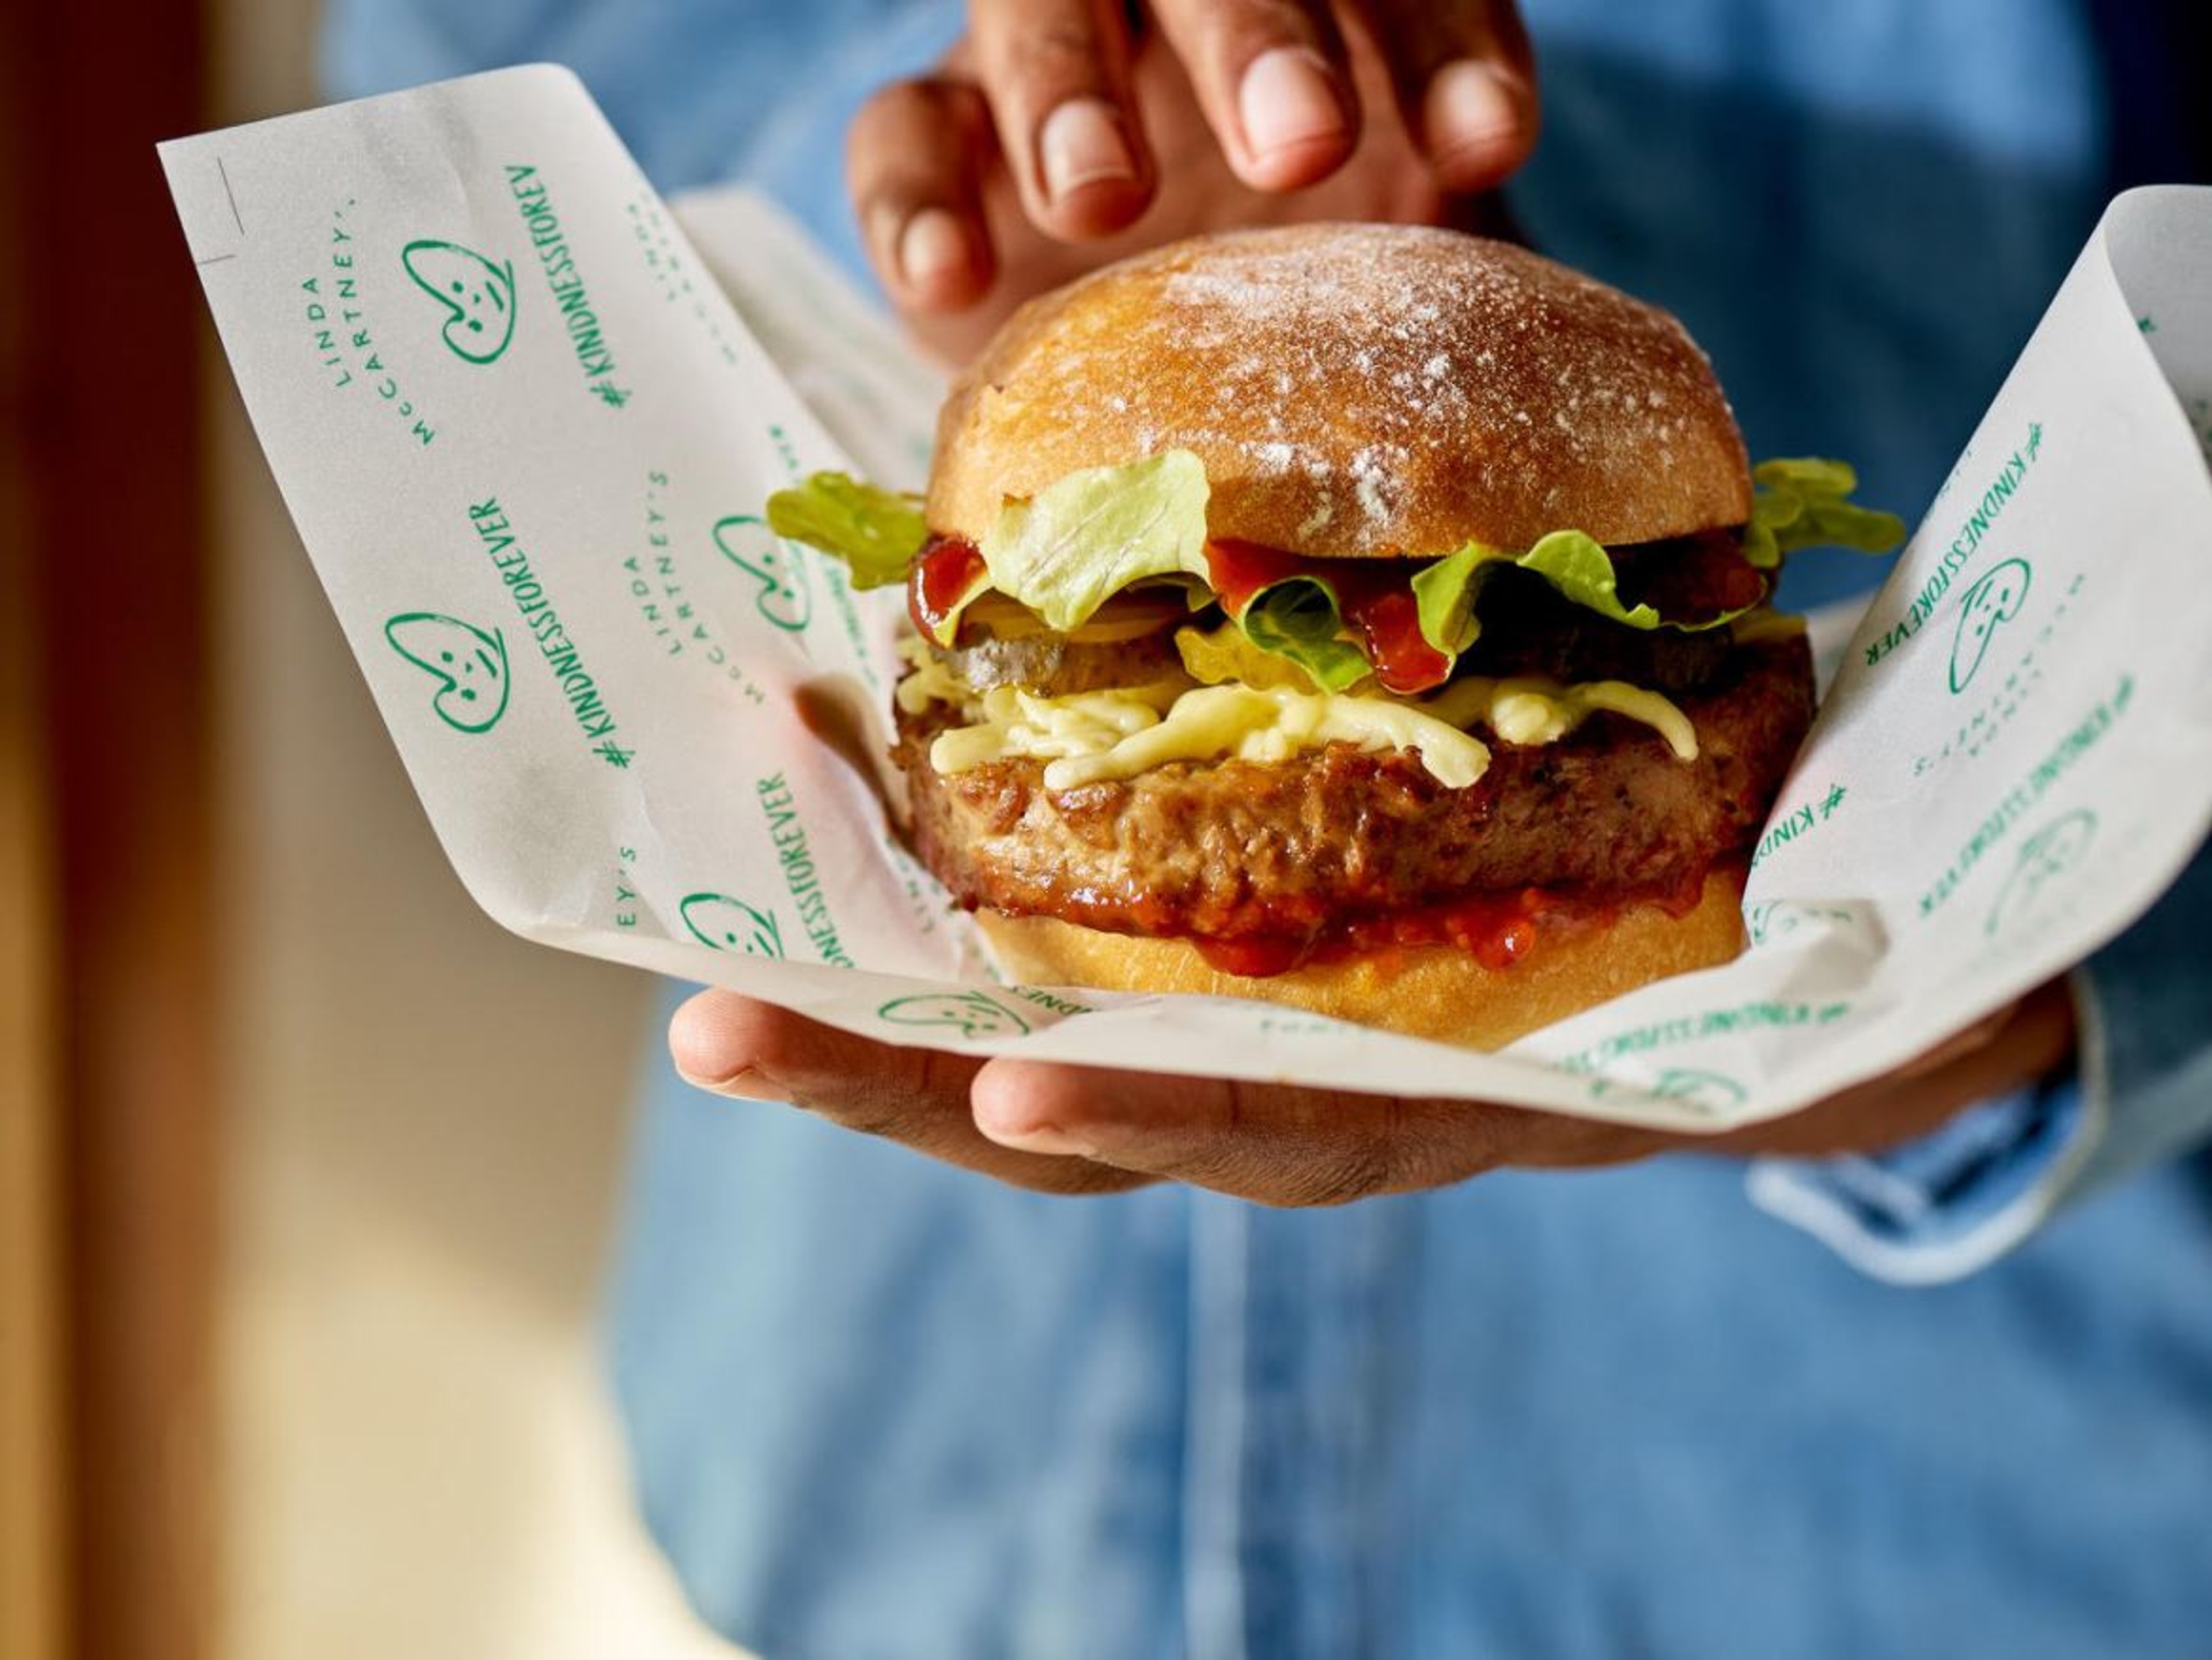 A hand holding a burger in a bun with cheese and lettuce, wrapped in paper